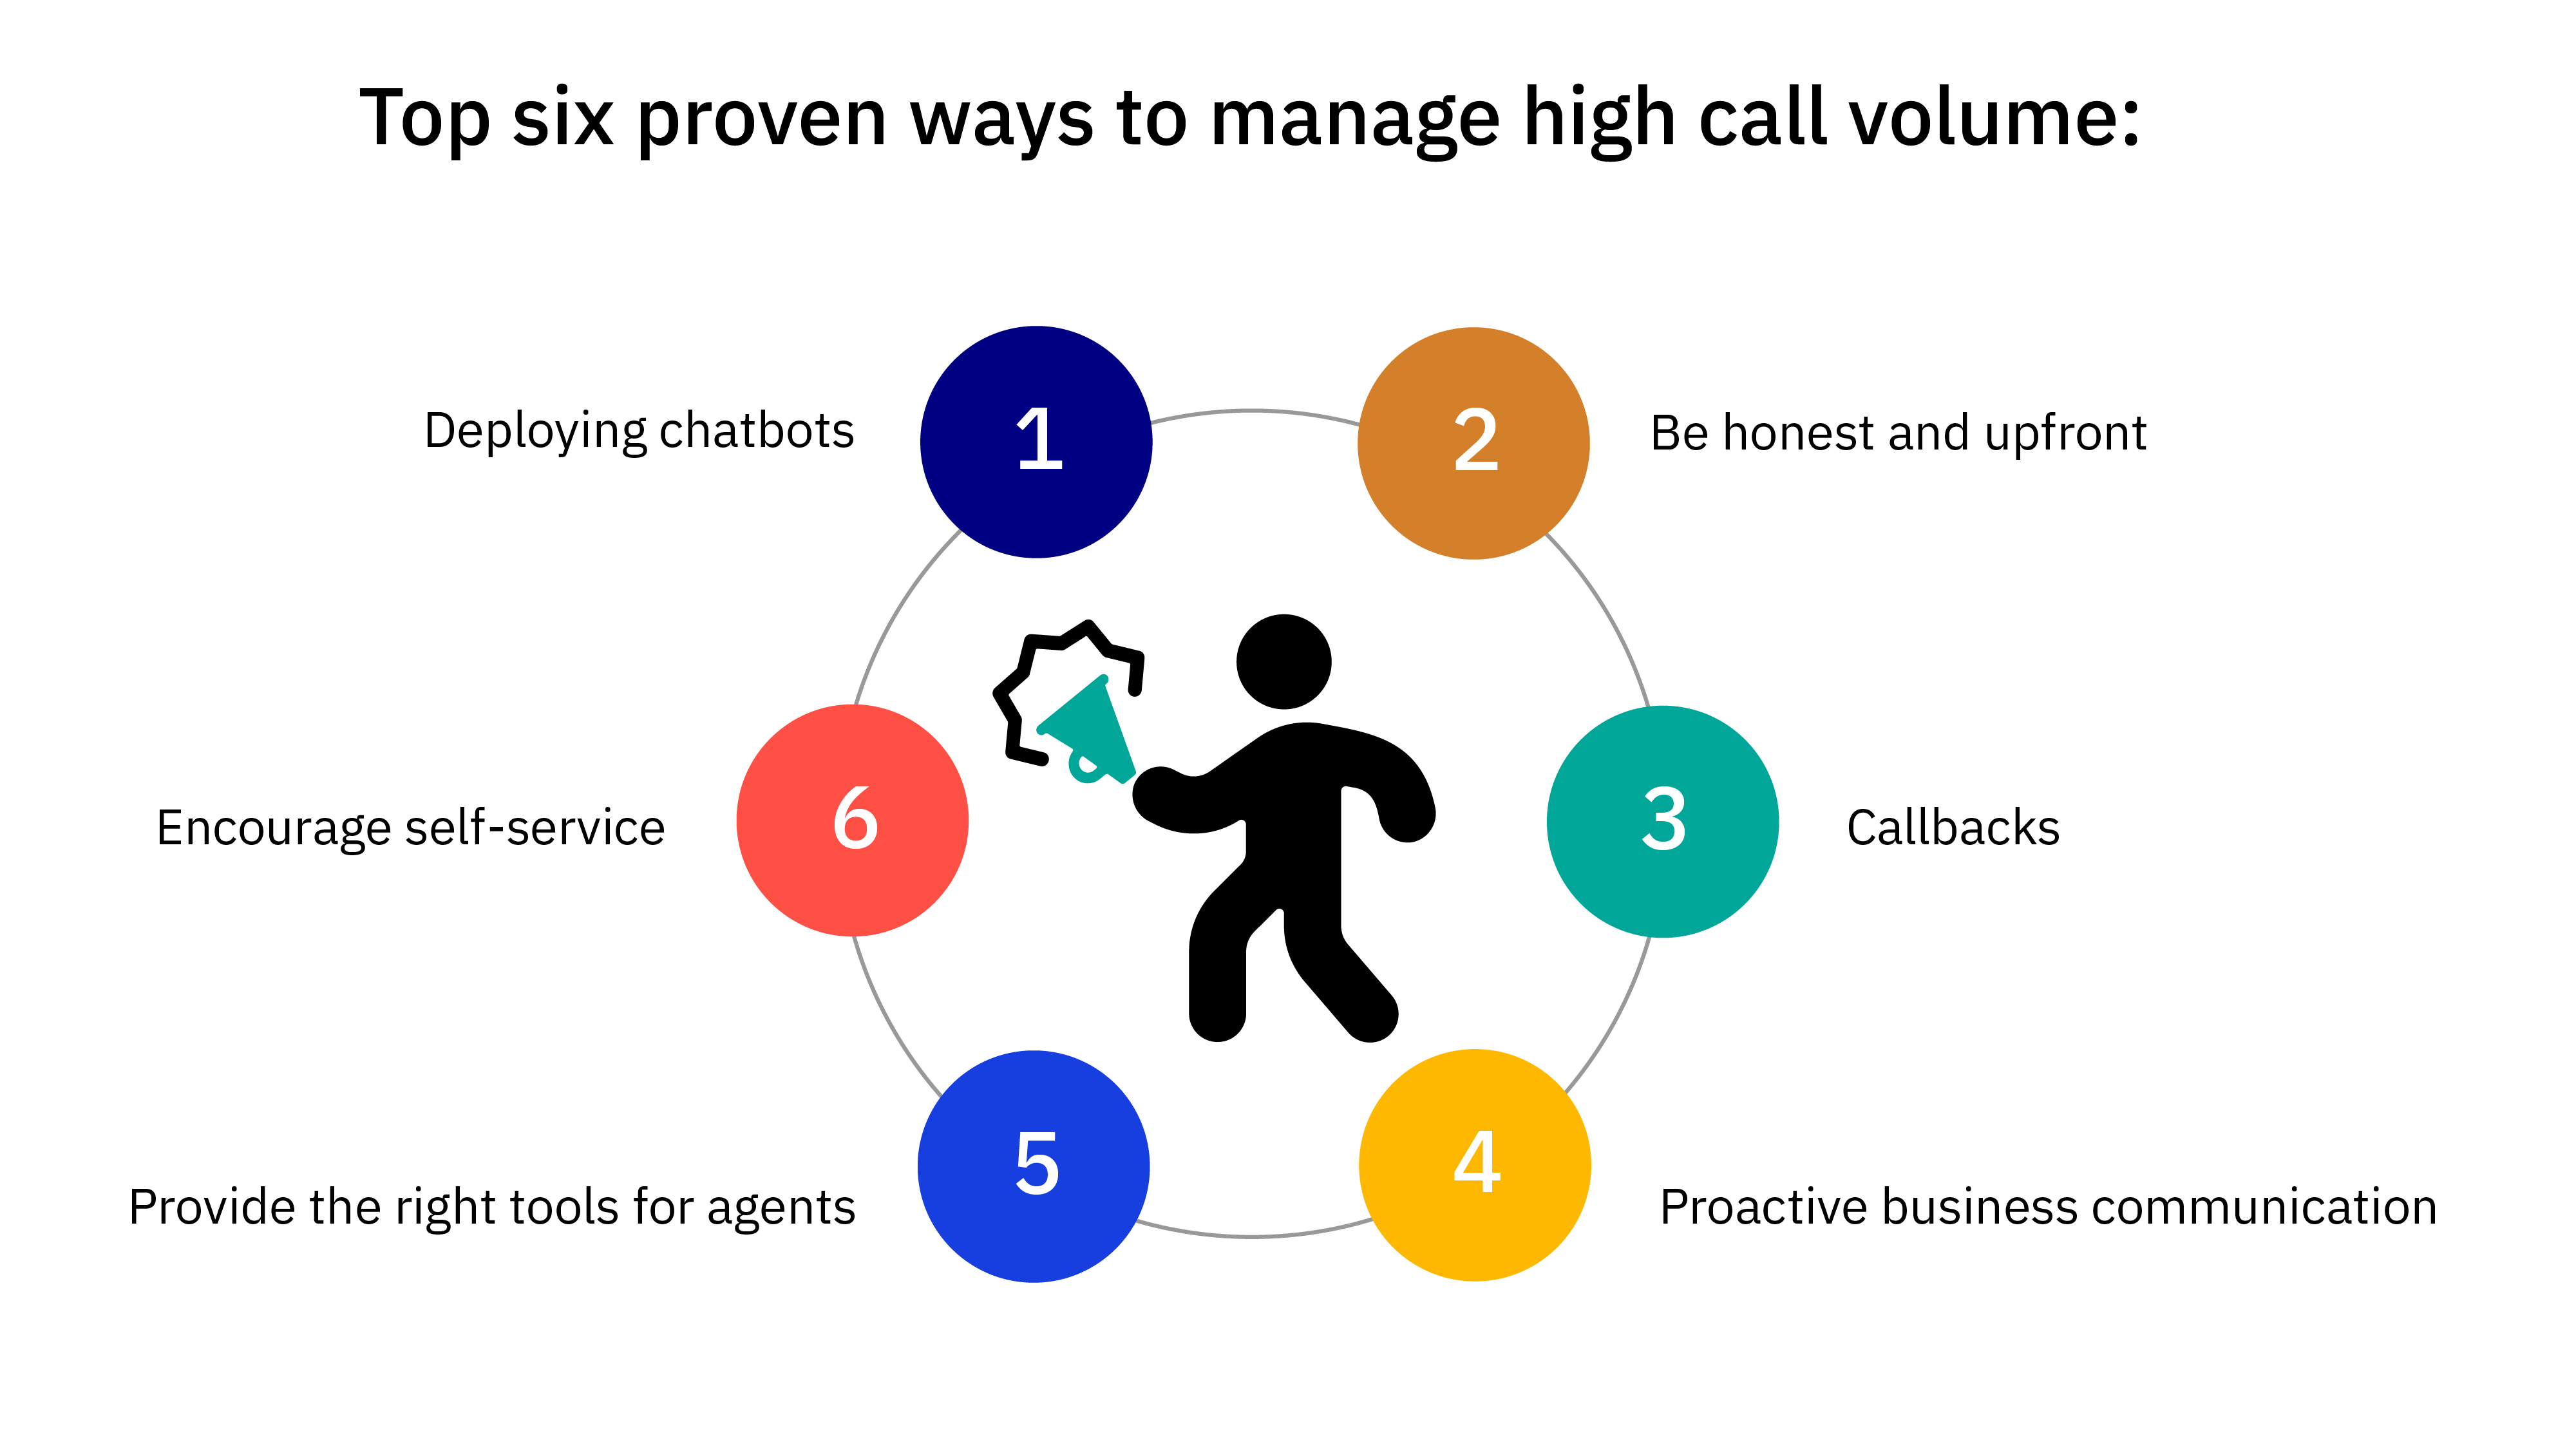 Top six proven ways to manage high call volume